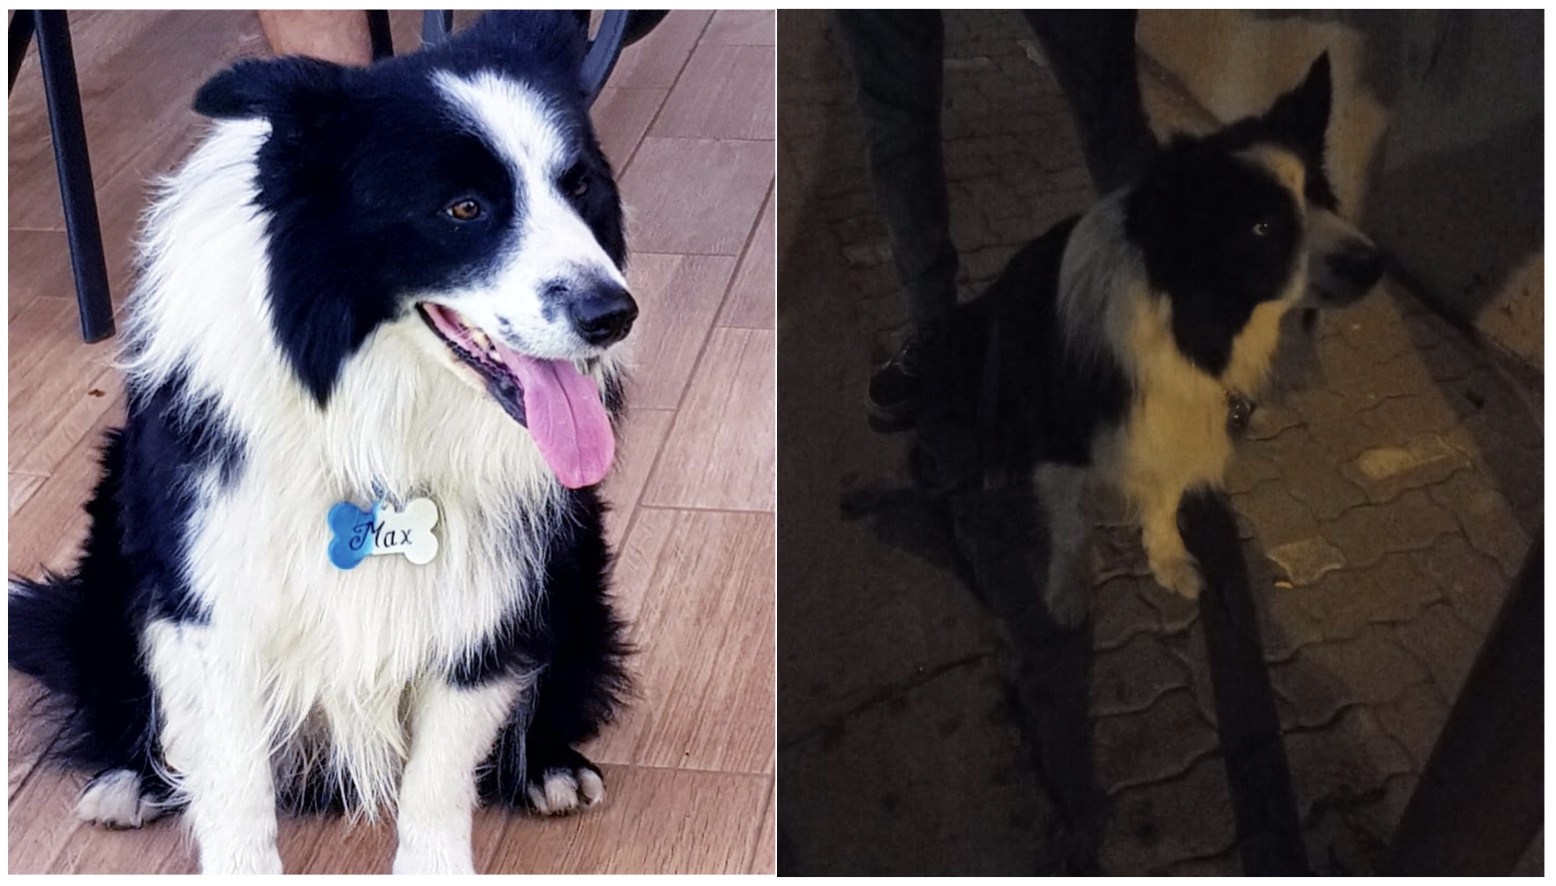 Social Media Miracle: Stolen Border Collie Max Rescued After Hijacking!